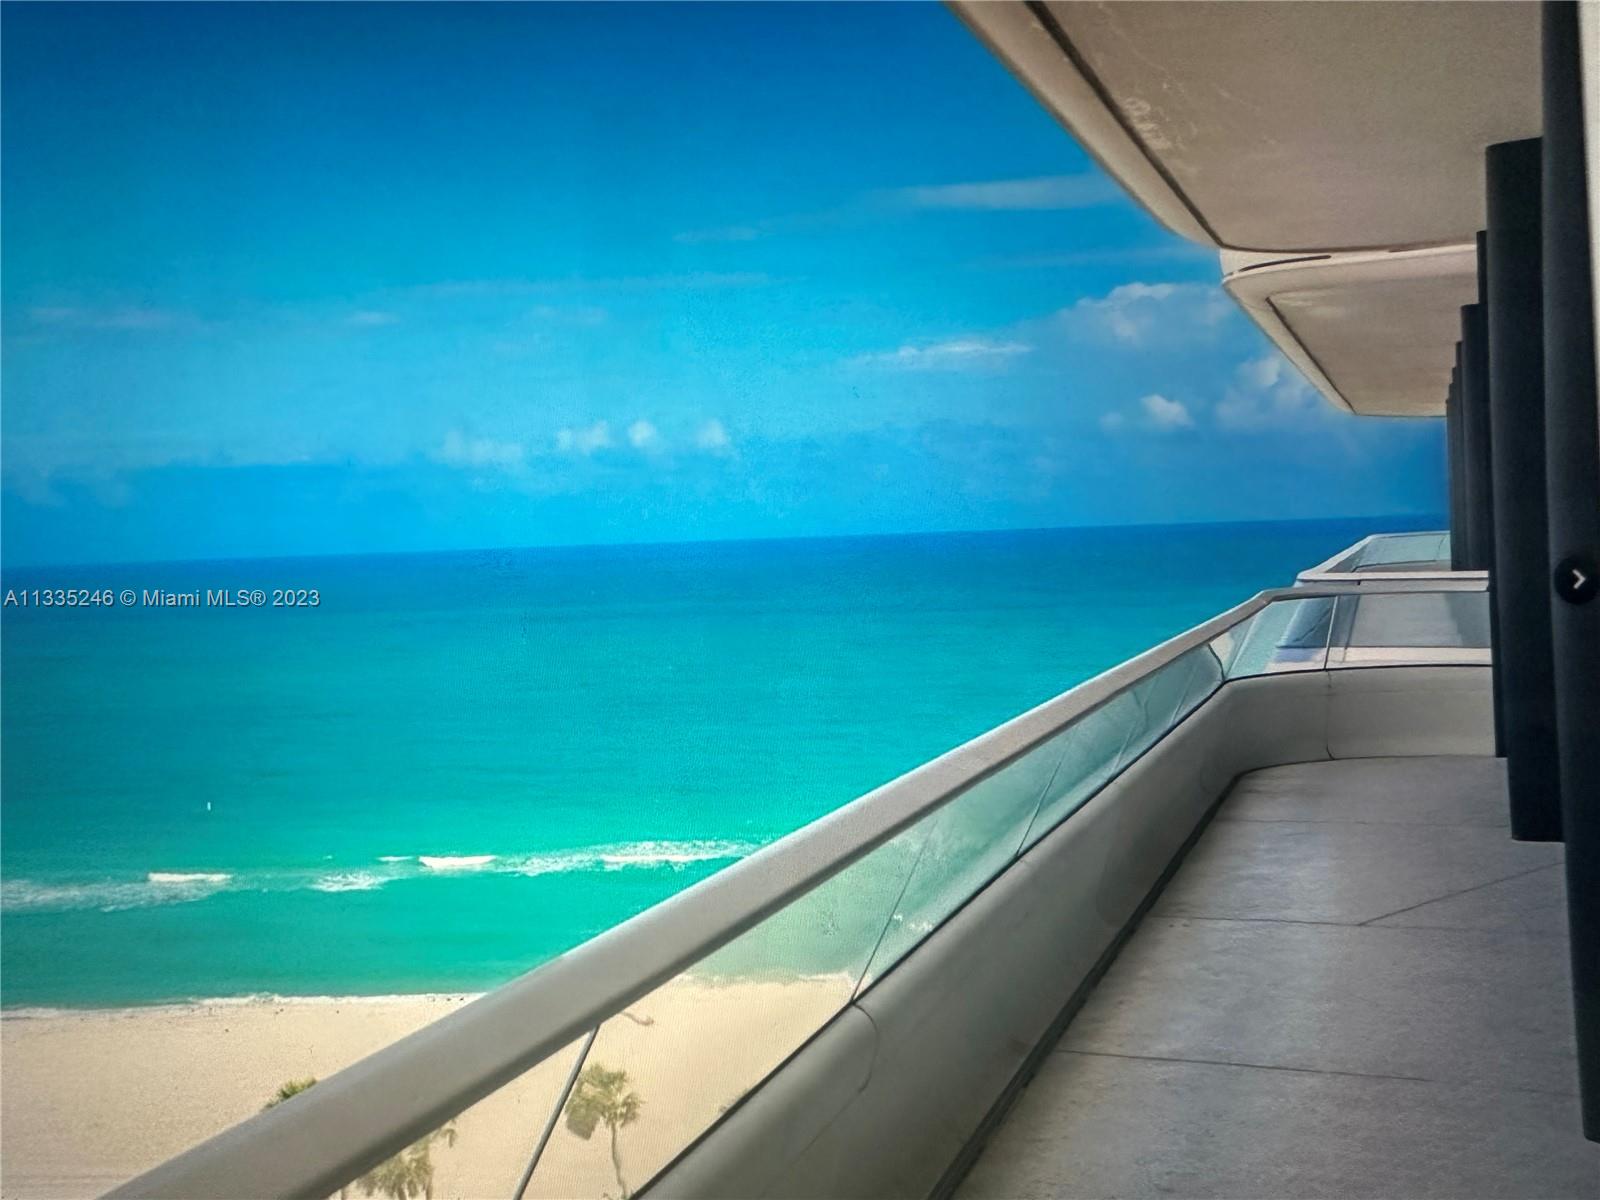 Unique opportunity to own the only 3 Bedroom, 3.5 Bathroom home at the iconic Faena House designed by Foster + Partners. The residence boasts 2,683 SqFt of living space (per owner) and features dual master suites and an oversized wrap-around terrace with North/West exposure. The C-line is the only line that offers unobstructed ocean views form one of the master bathrooms. Light oak flooring, kitchens by Molten with full Miele appliances and polished Thassos marble countertops are just a few of the touches that create a distinctive and unparalleled design. Adjacent to the 5 star, #1 rated hotel in Miami, The Faena. Enjoy luxurious Hotel amenities and services that can be brought to your door, while benefiting from the privacy and exclusivity of living in Miami's top residential building